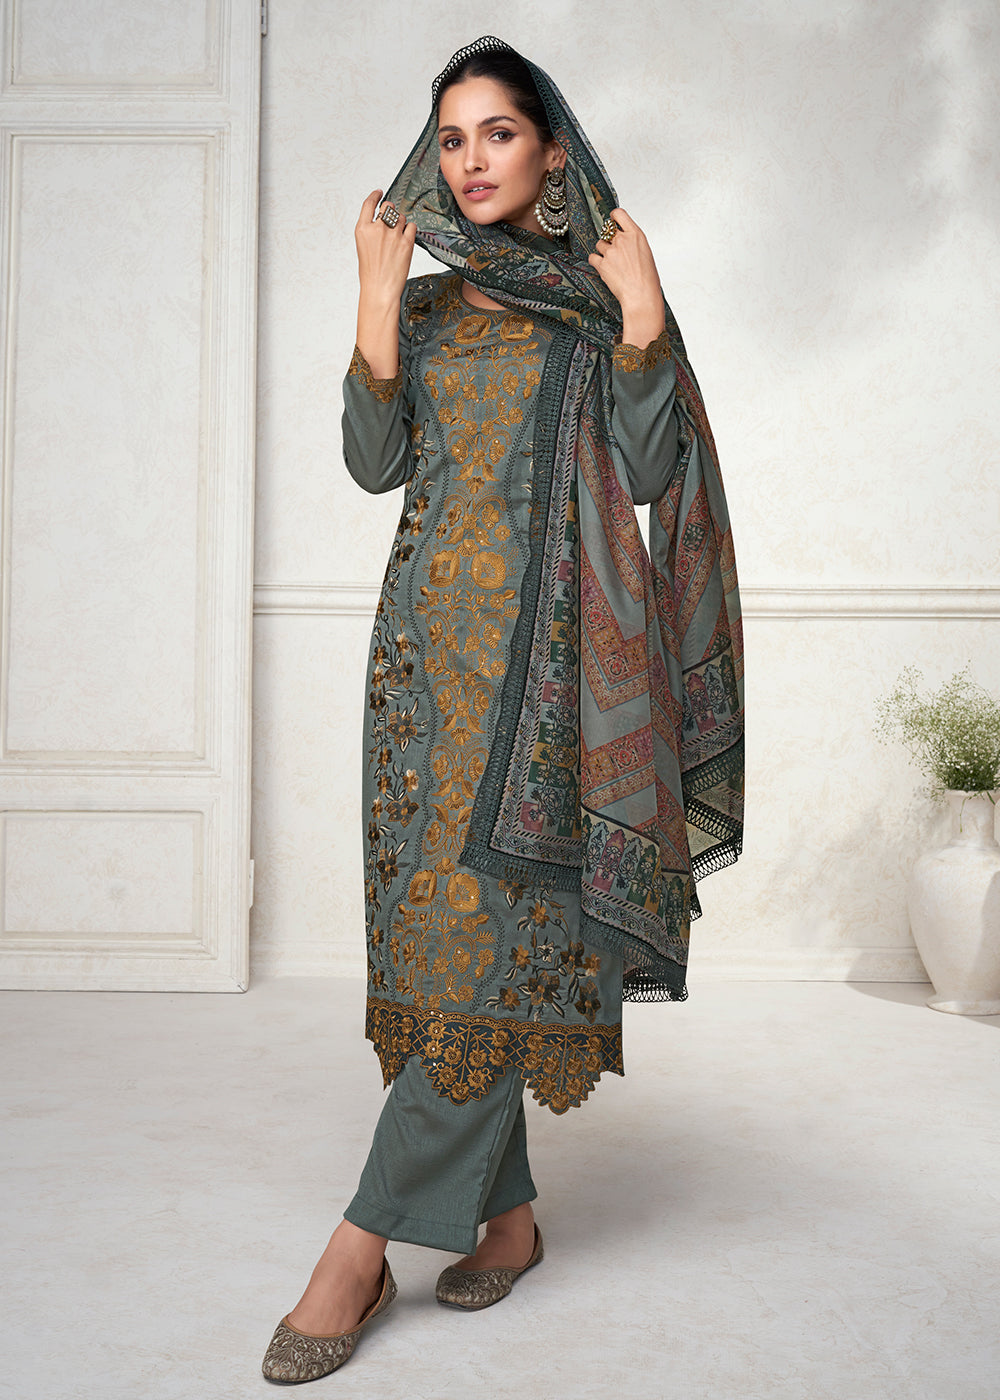 Buy Now Fabulous Grey Floral Embroidered Silk Wedding Salwar Suit Online in USA, UK, Canada, Germany, Australia & Worldwide at Empress Clothing. 